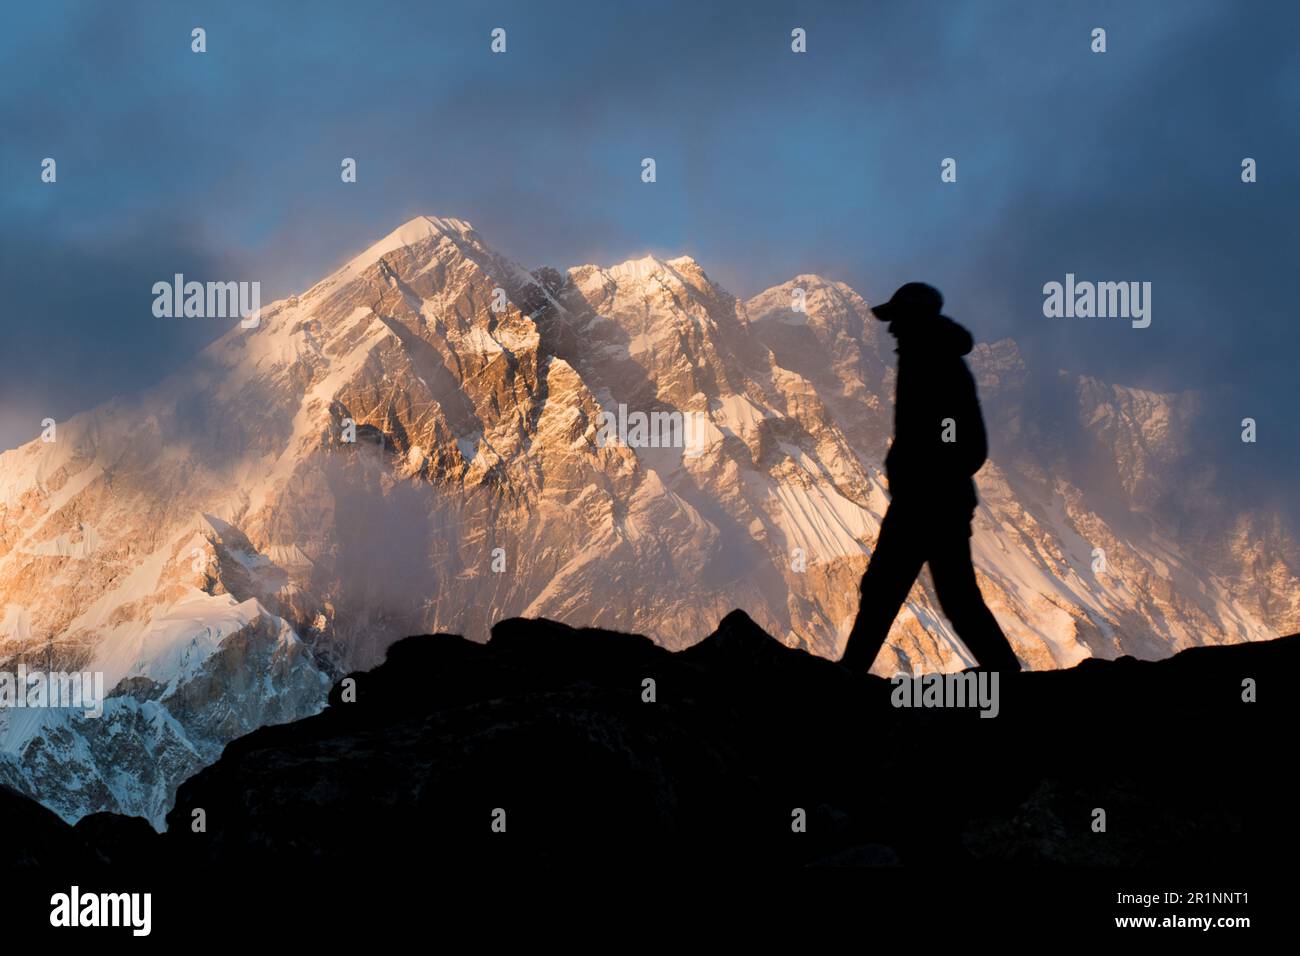 A man walks in silhouette on a ridge with Nuptse in the Himalayan background at sunset. Stock Photo